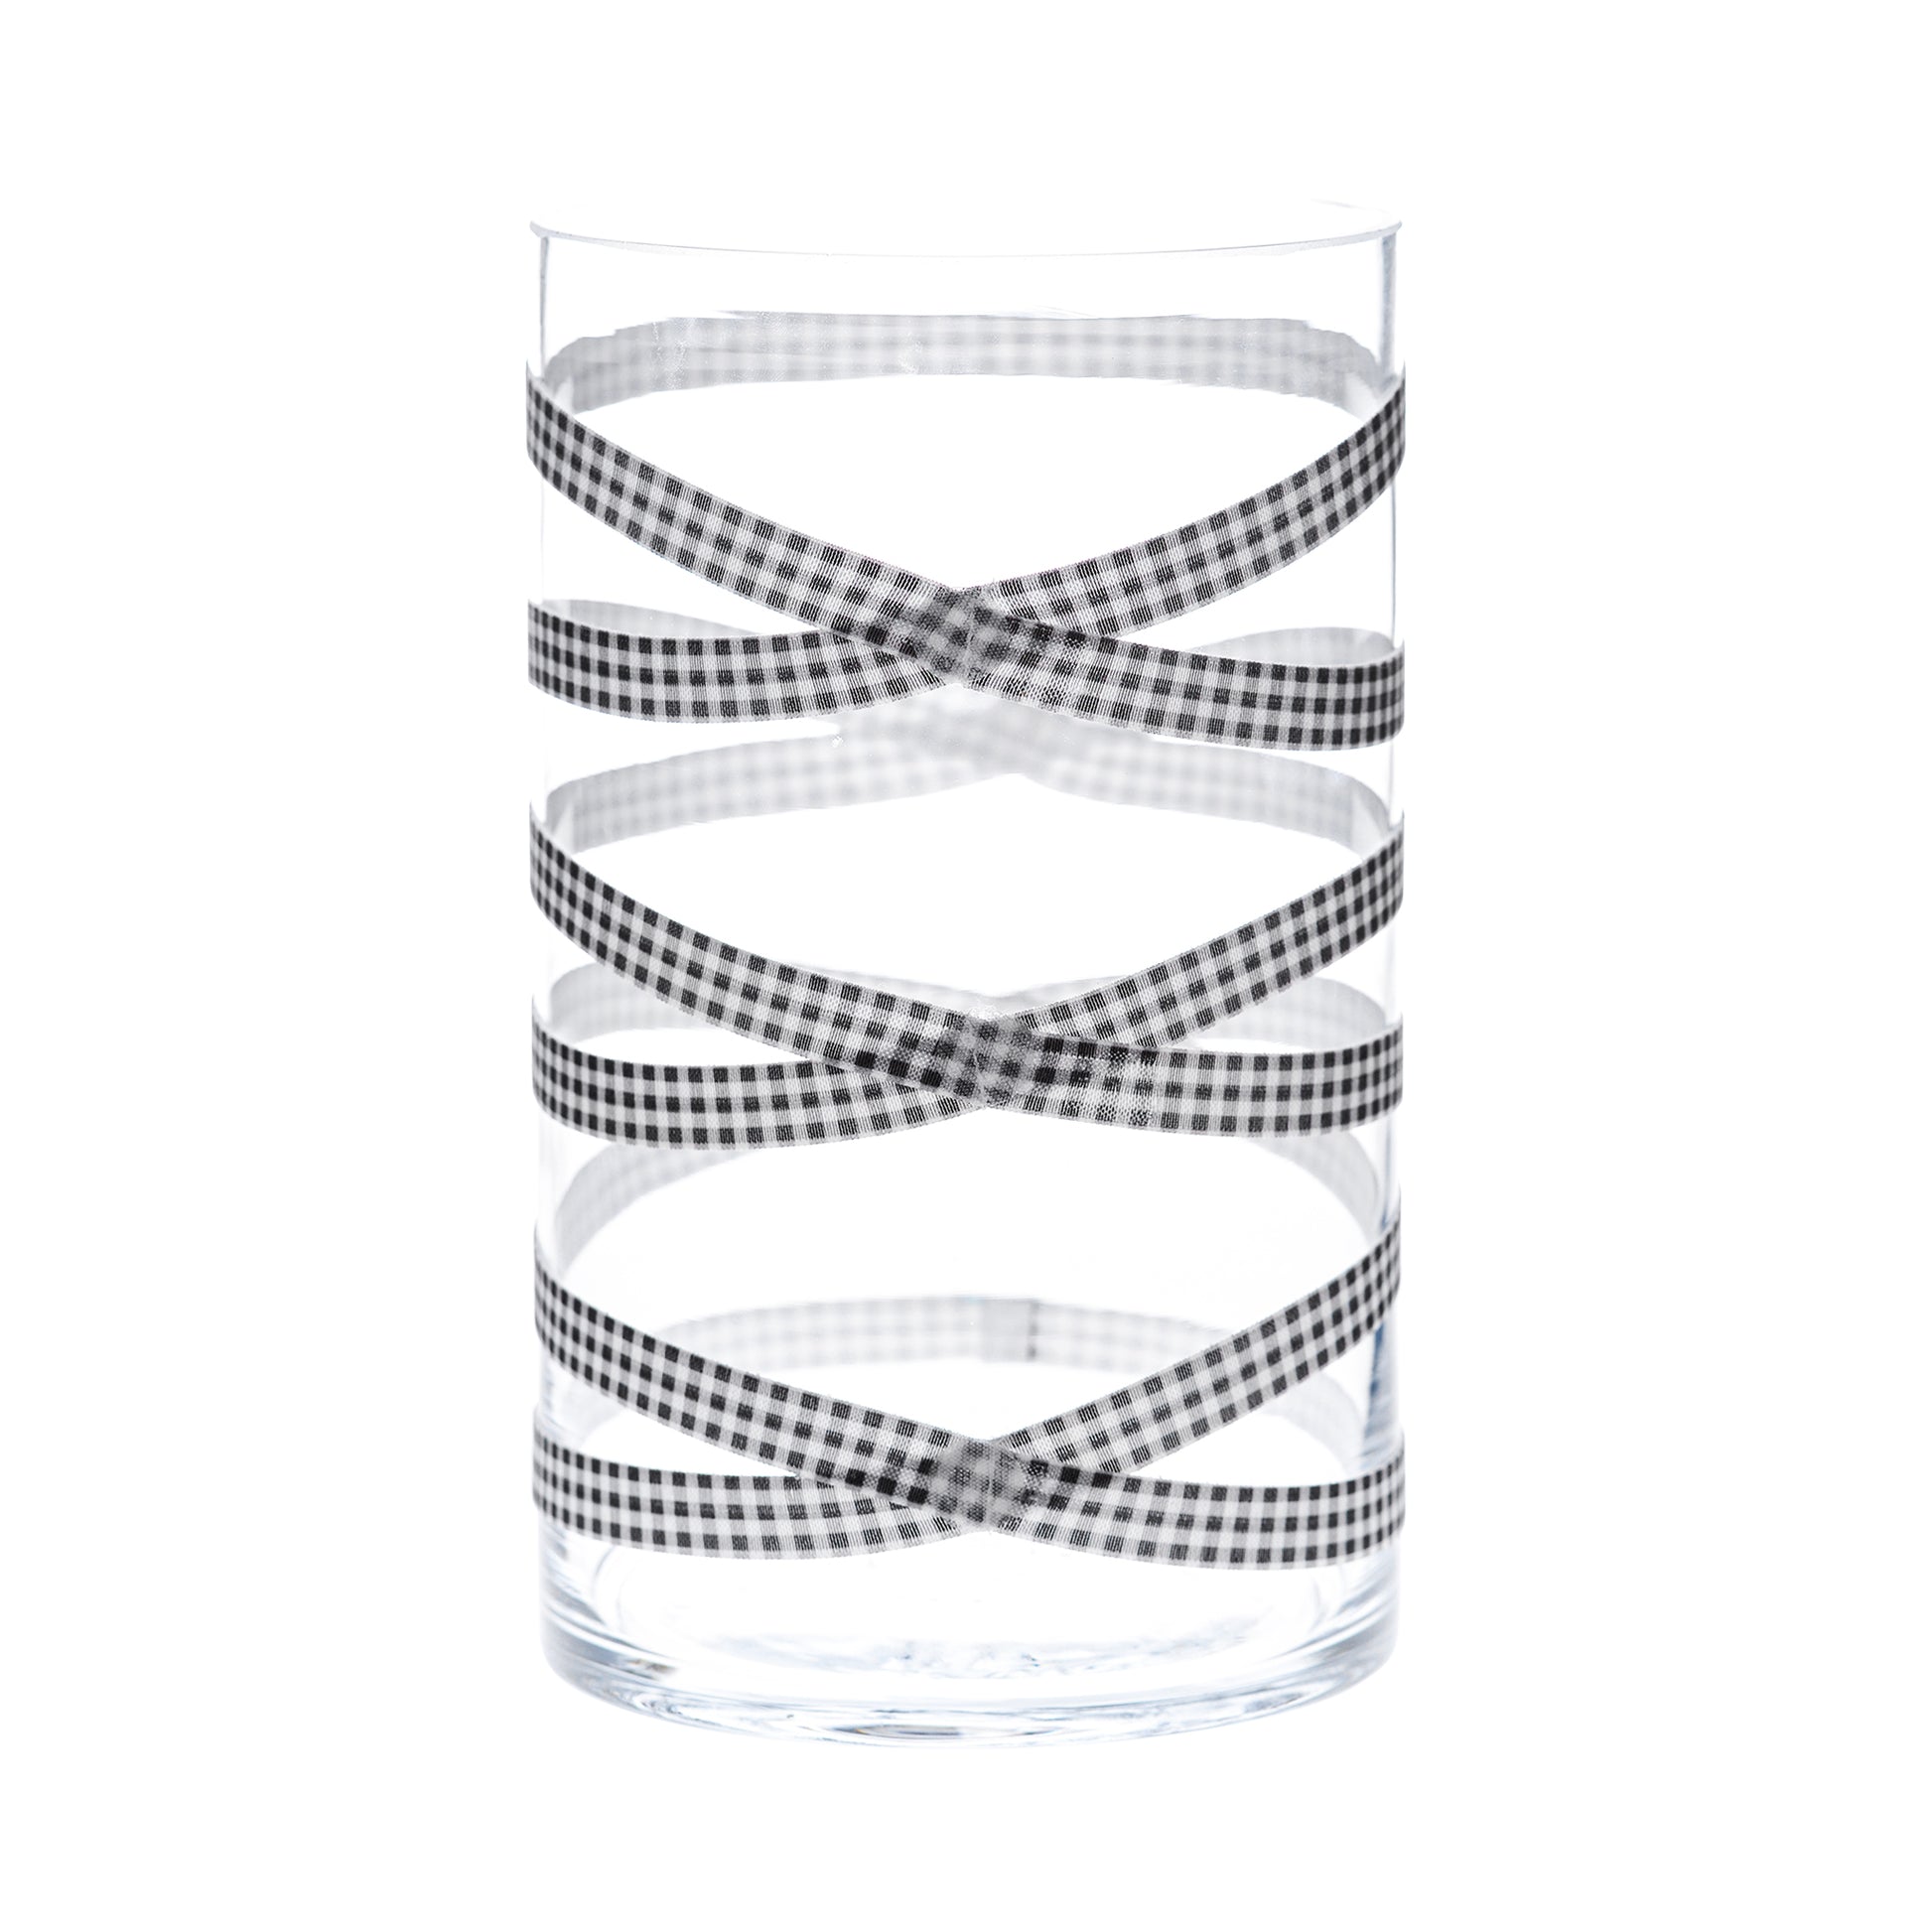 Front of Glass Wrappings' 6" x 10" cylinder wrapped in black and white check elastic, forming 3 "crosses."